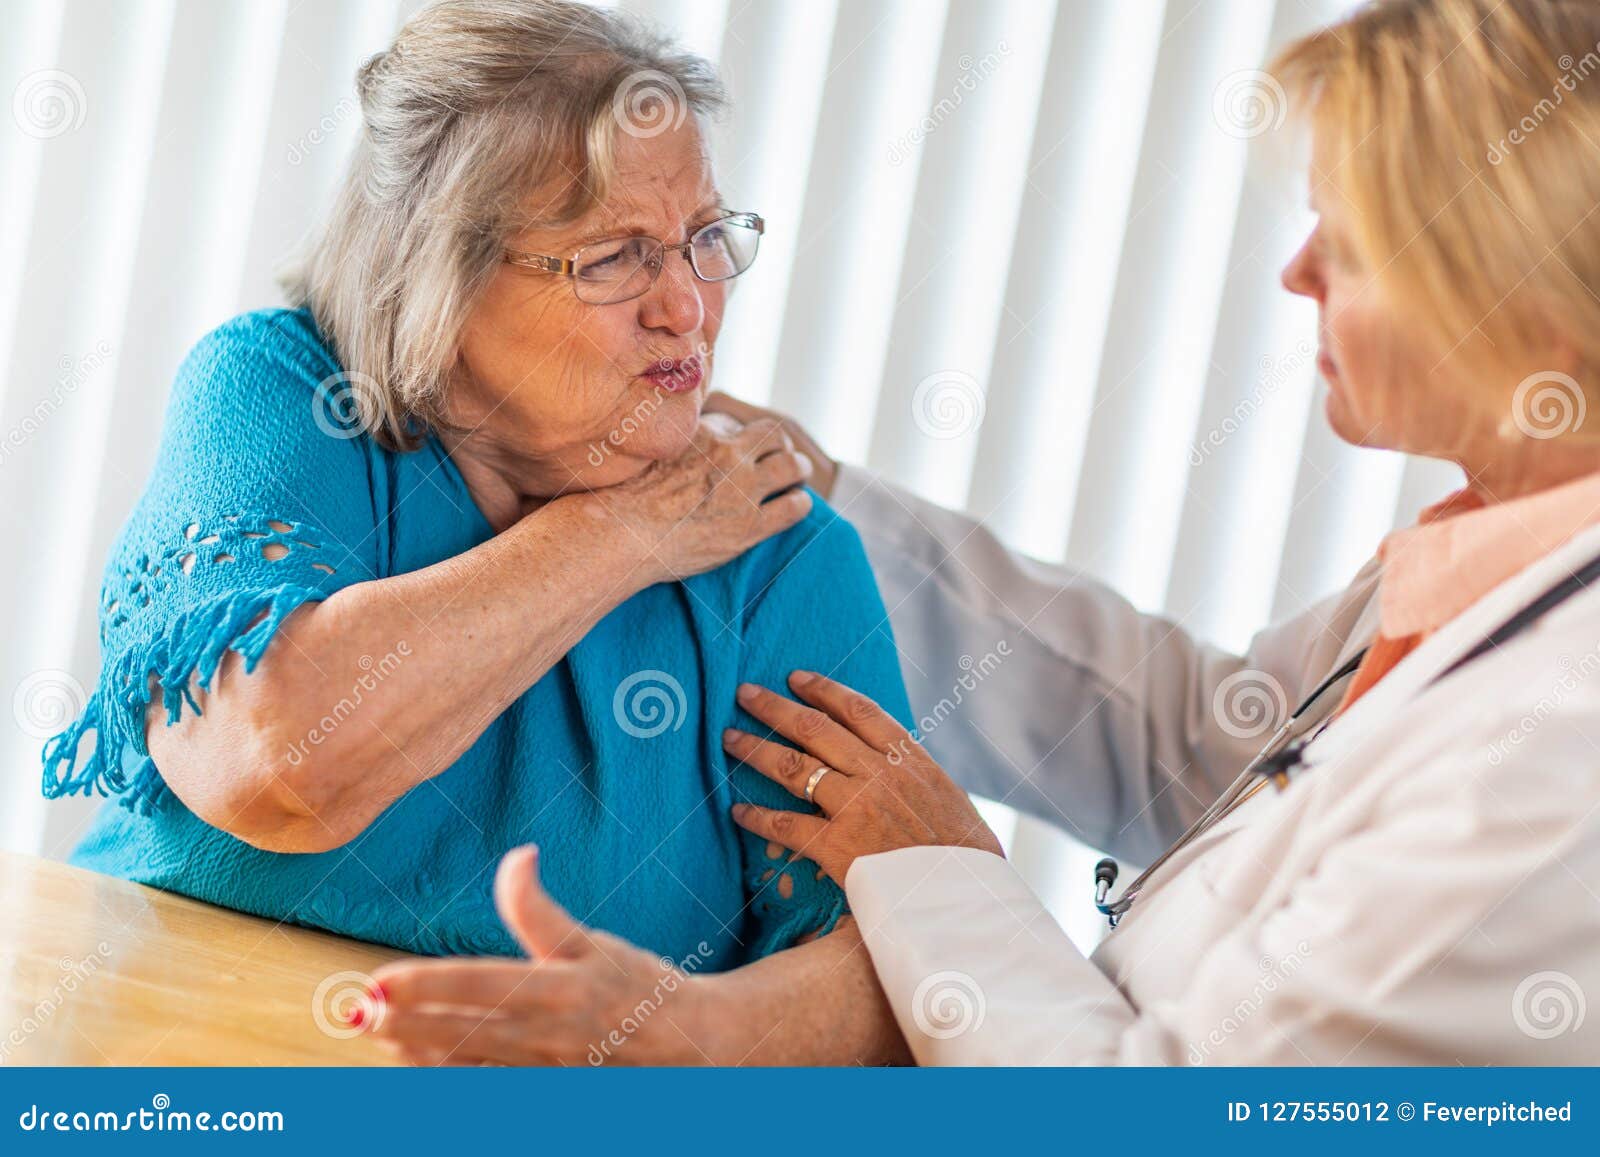 senior adult woman talking with female doctor about sore shoulder